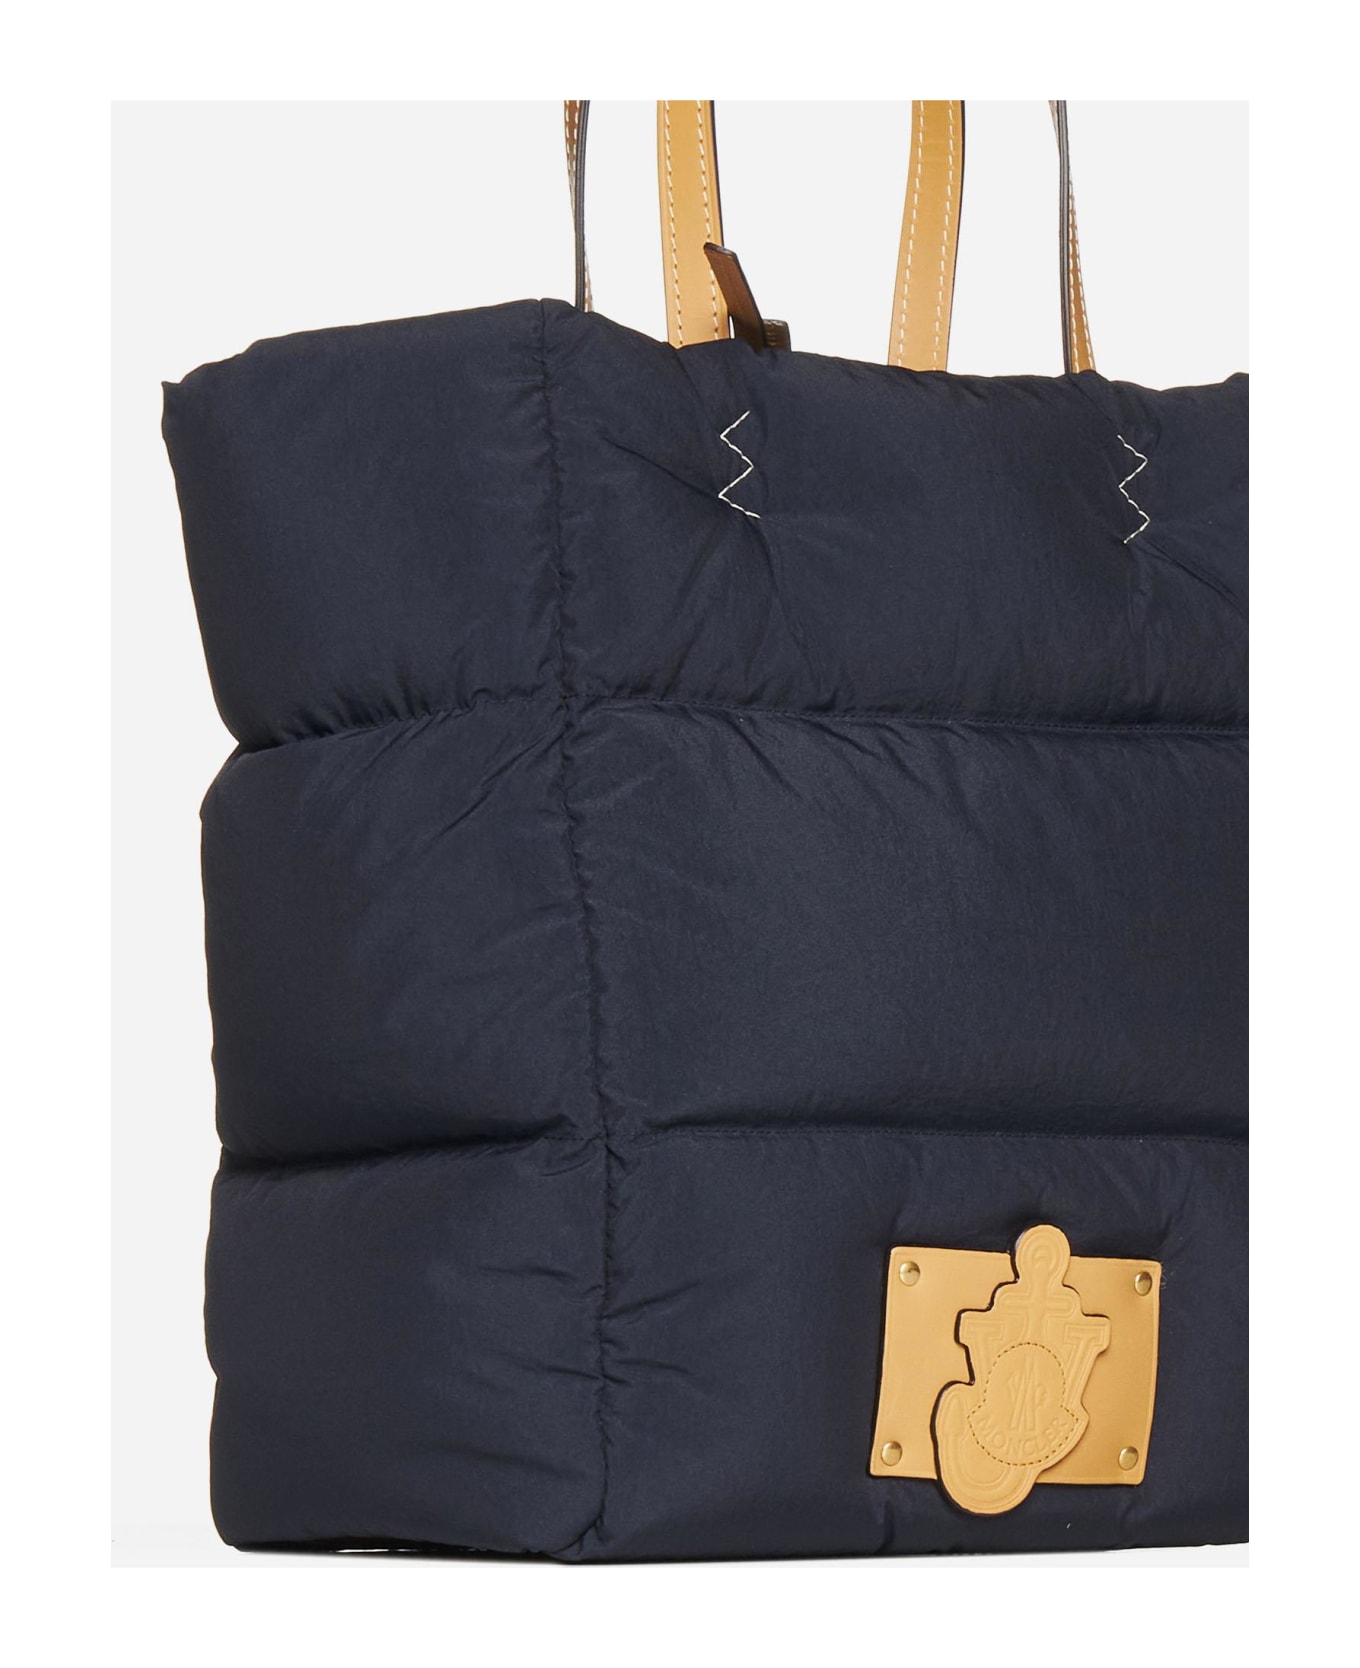 Moncler Genius Nylon And Leather Tote Bag - BLUE トートバッグ